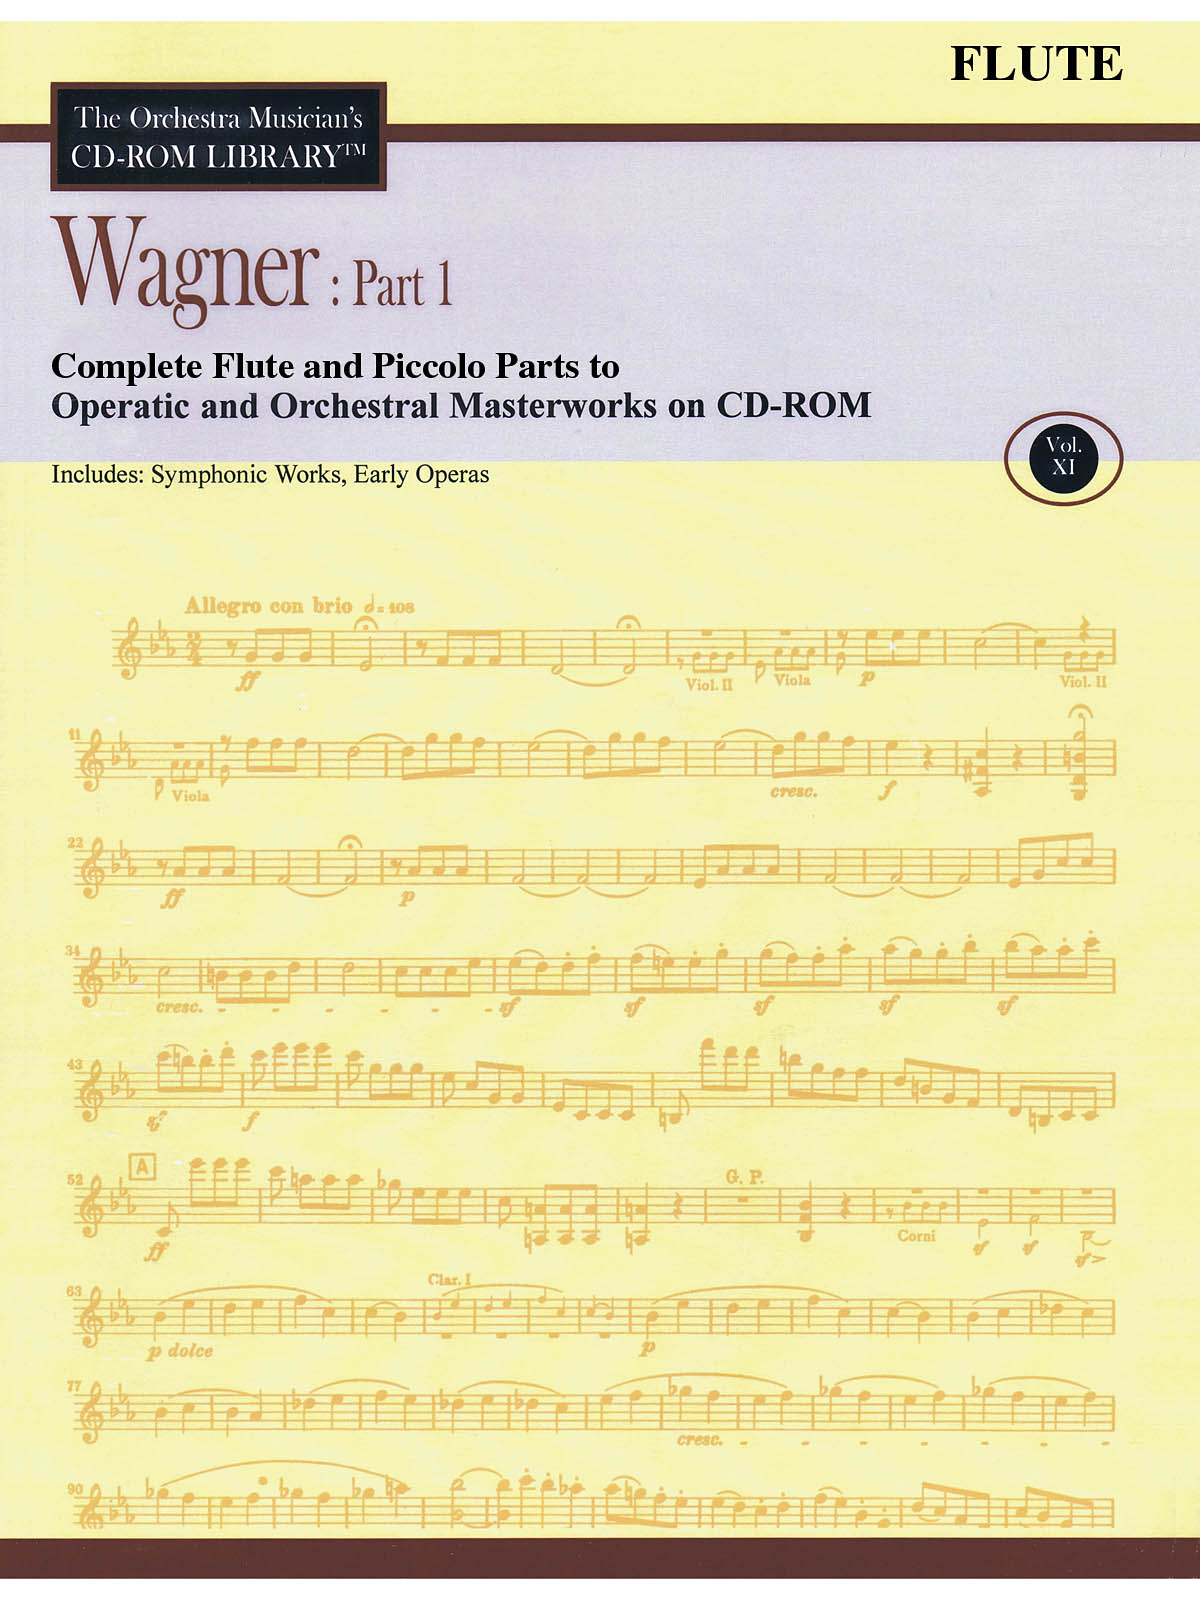 Wagner: Part 1 - Volume 11(The Orchestra Musician's CD-ROM Library - Flute)